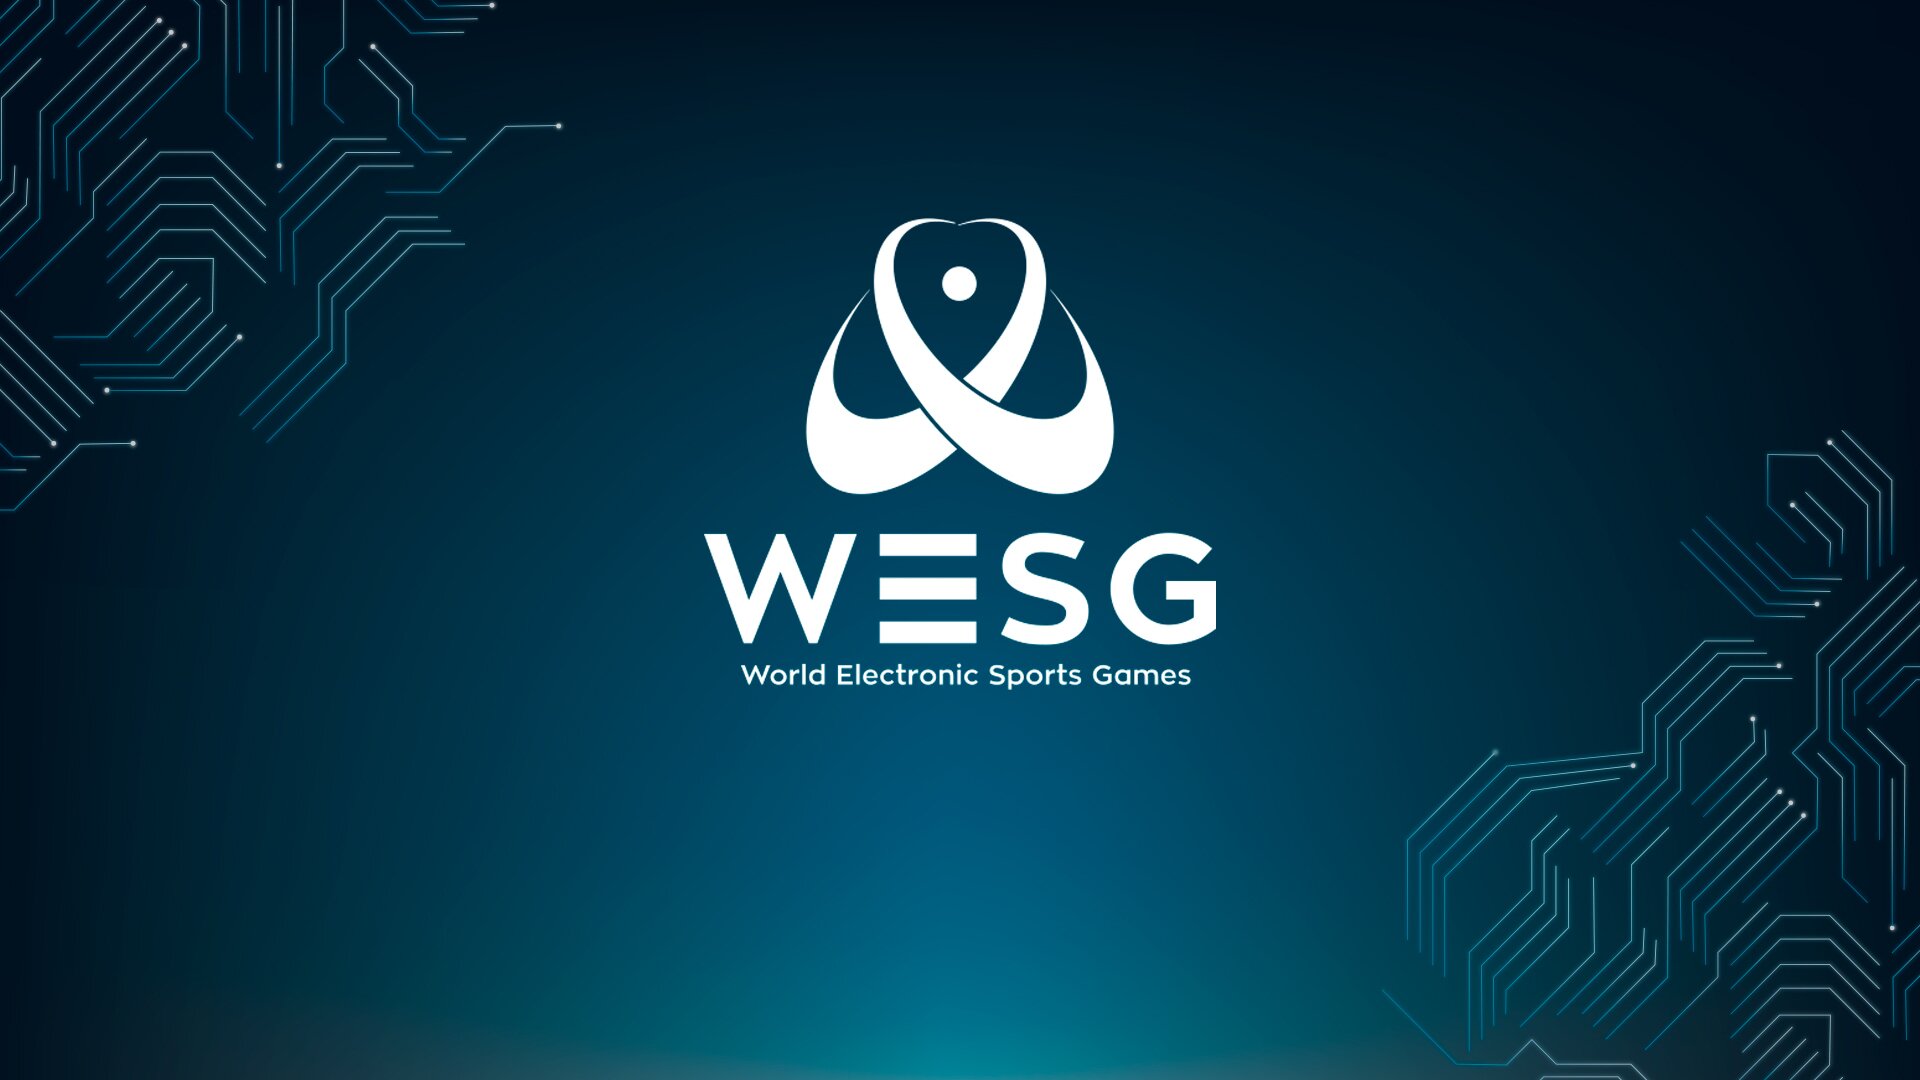 The LAN Finals for Dota 2’s WESG 2018 have kicked off in Chongqing. 24 teams, representing 20 different countries are competing for $890,000 USD.